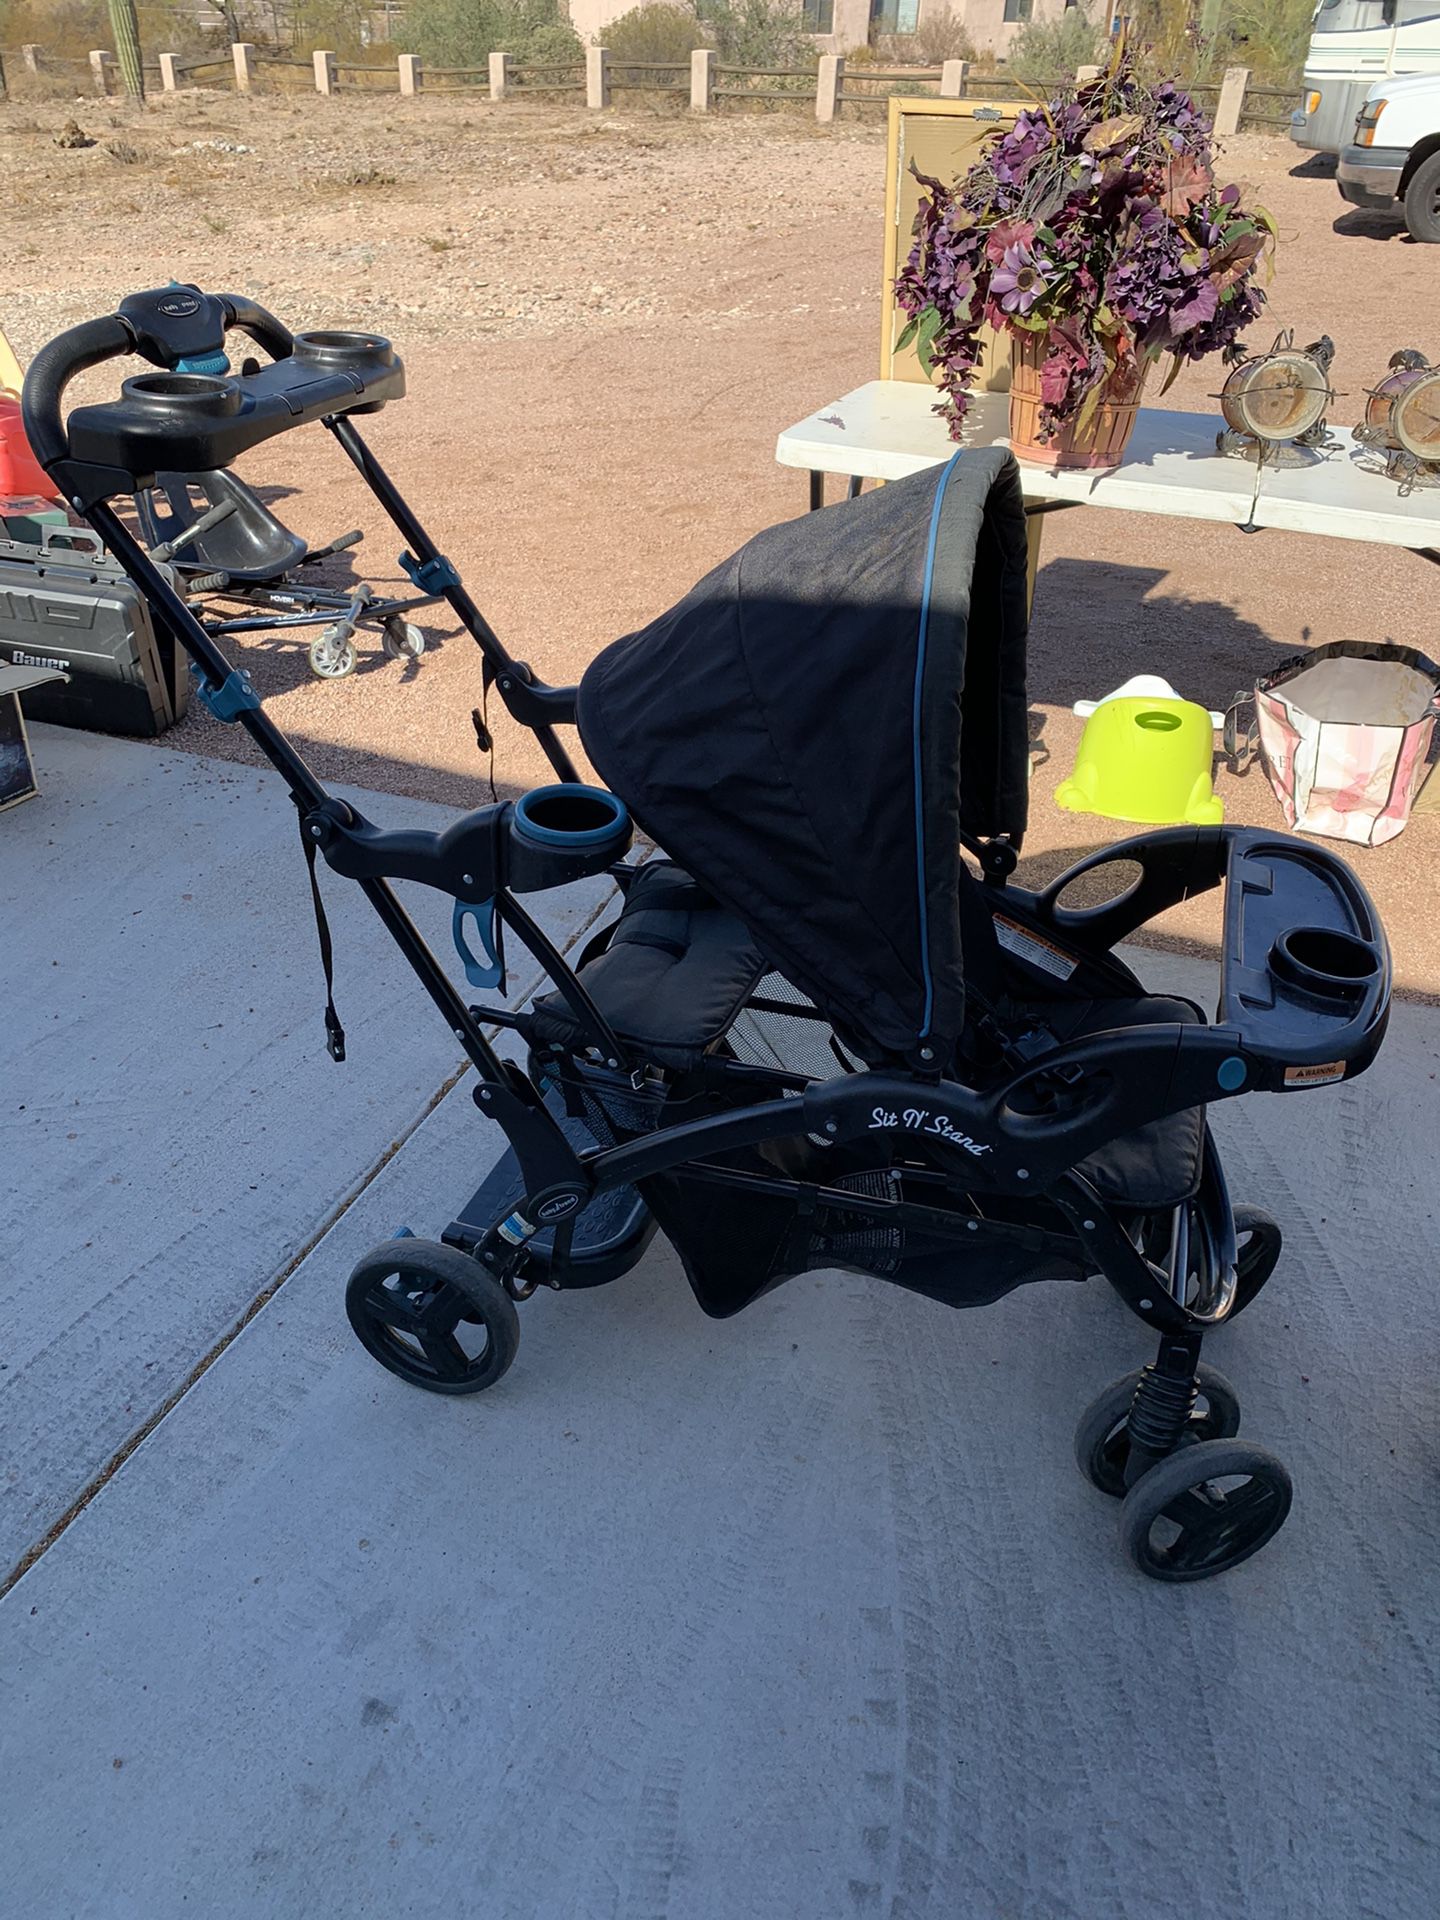 Sit and Stand Baby Trend stroller